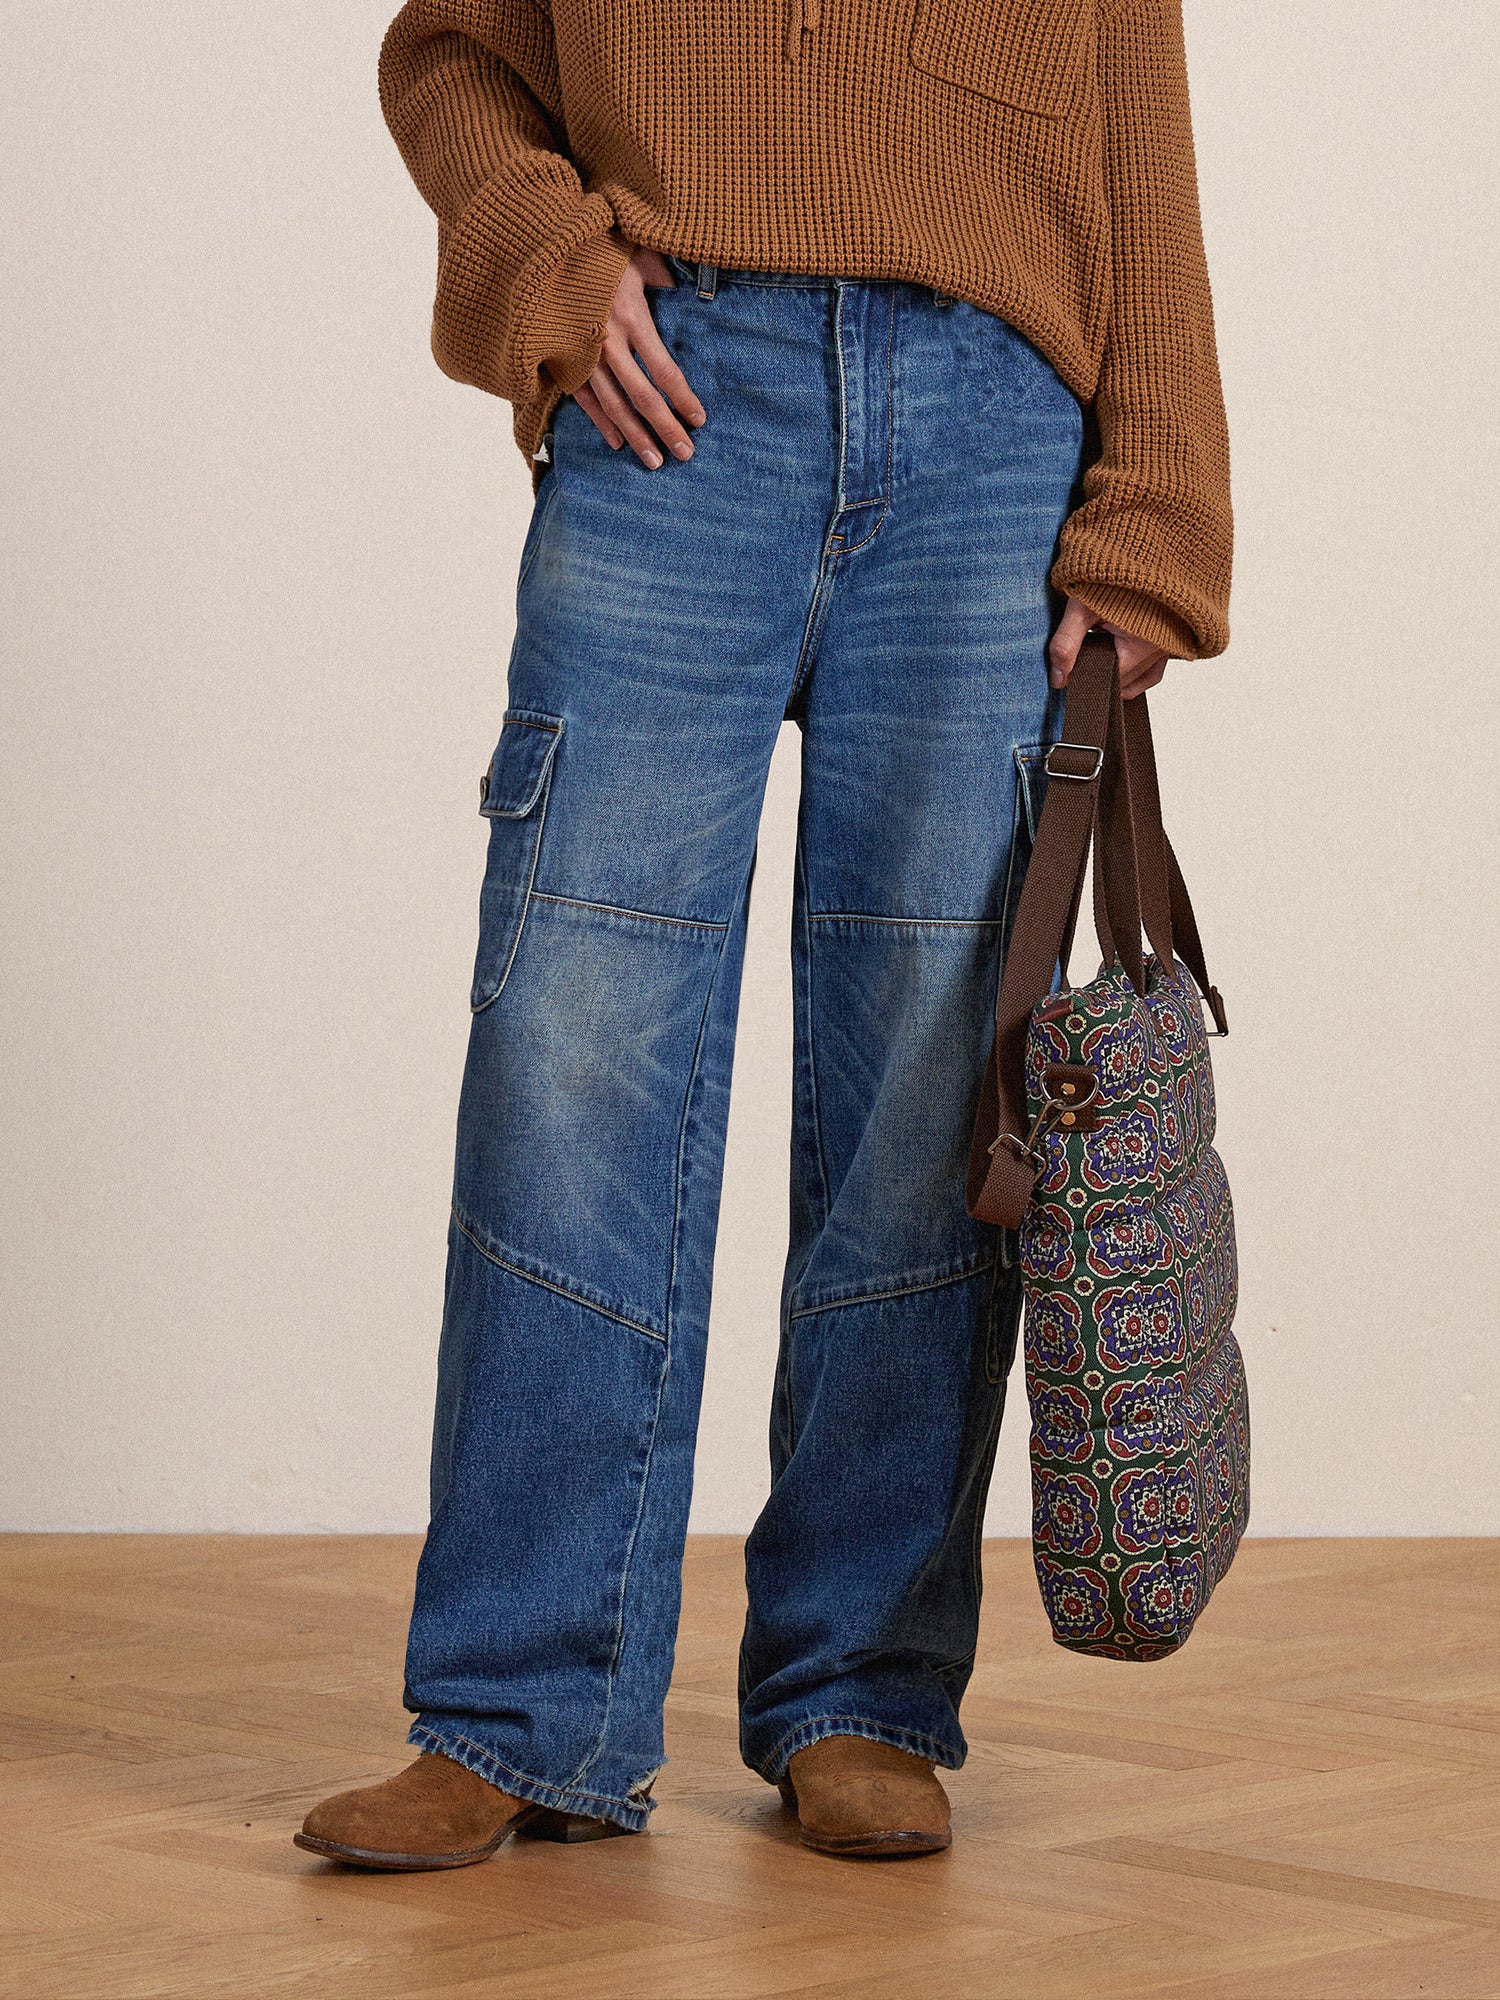 Person standing in Found Siwa Cargo Paneled Jeans with cargo pockets and a brown sweater, holding a patterned bag, against a neutral background.